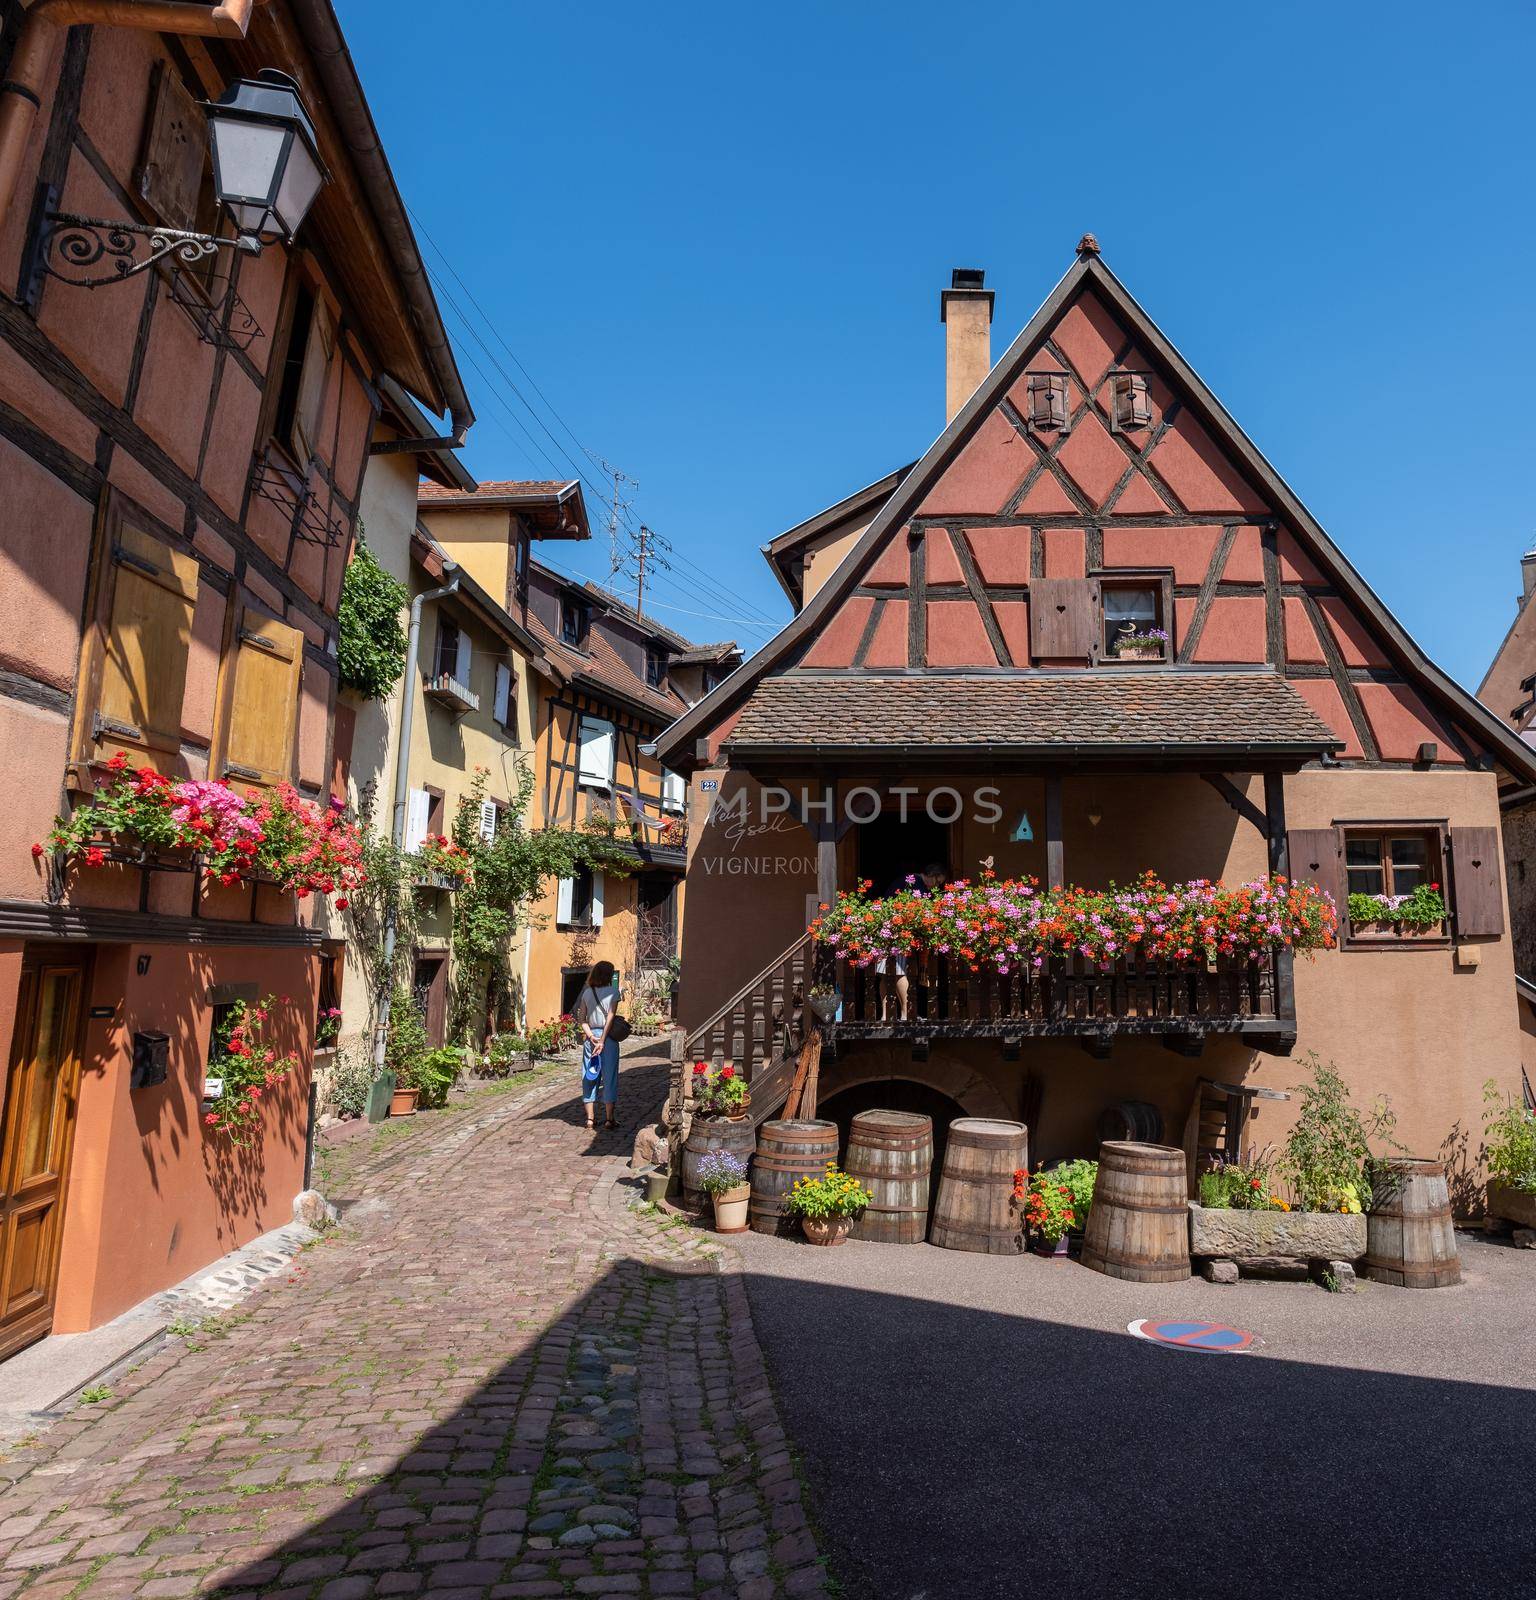 Eguisheim, Alsace, France,Traditional colorful halt-timbered houses in Eguisheim Old Town on Alsace Wine Route, France by fokkebok